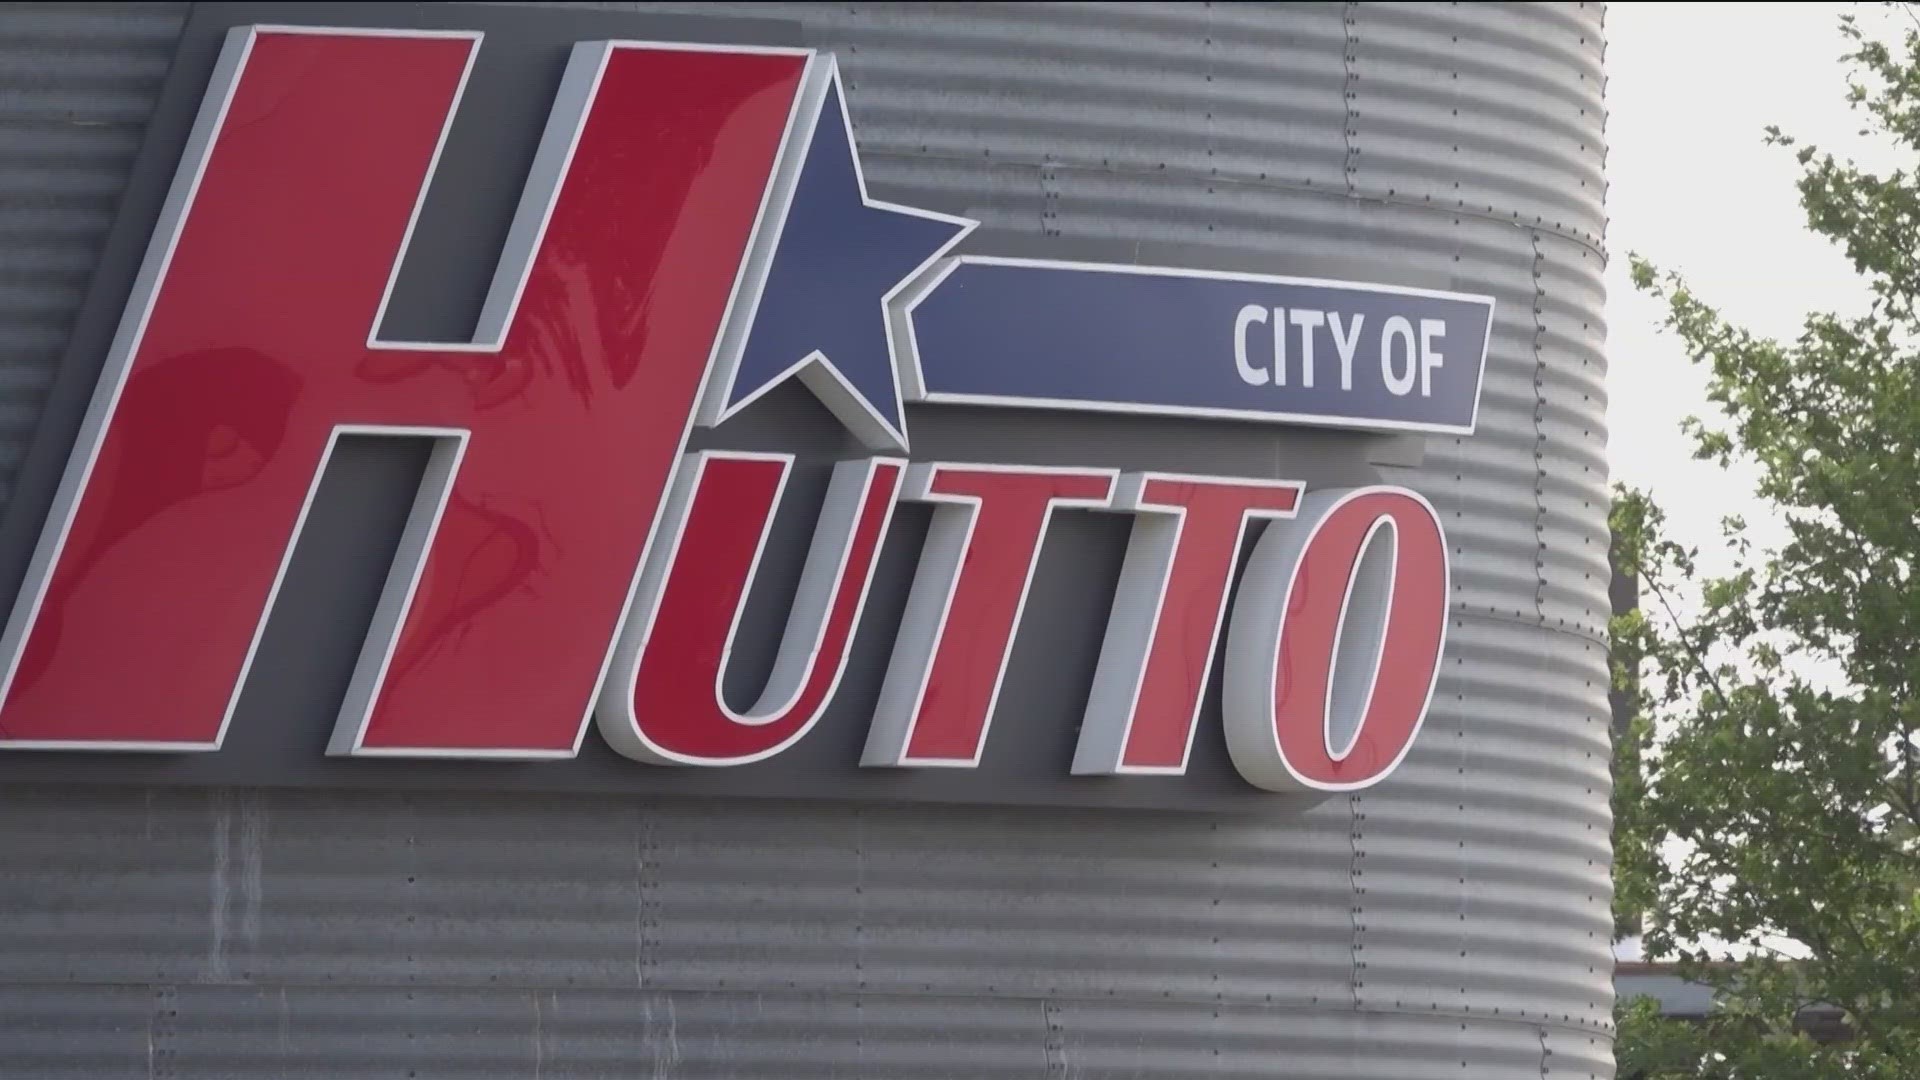 The City of Hutto experienced a potential cybercrime this week.